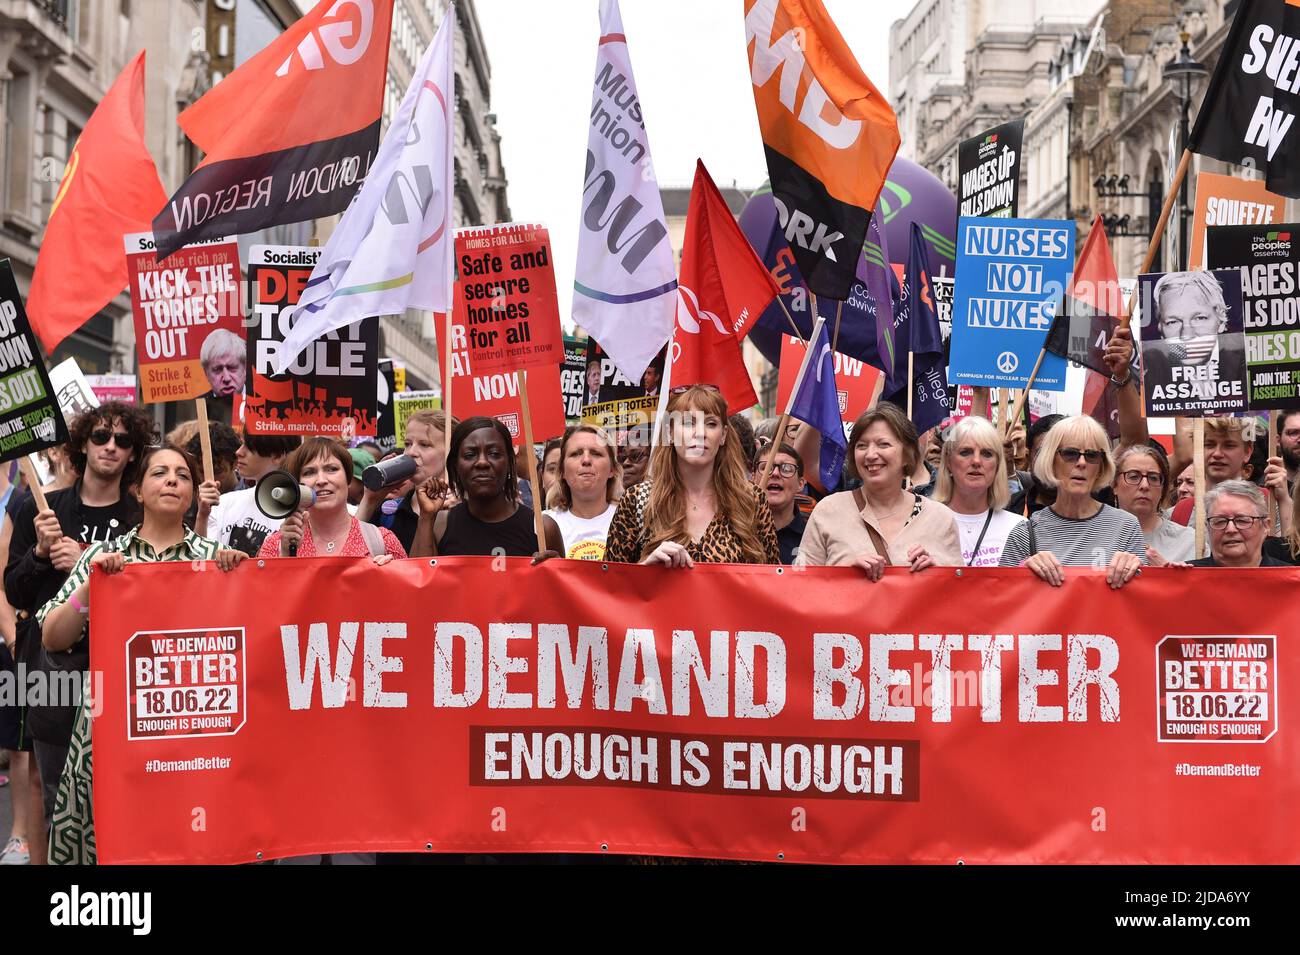 Thousands of protesters marched through central London in TUC (Trades Union Congress) organised rally, in demand of action on the costs of living and higher wages. Stock Photo